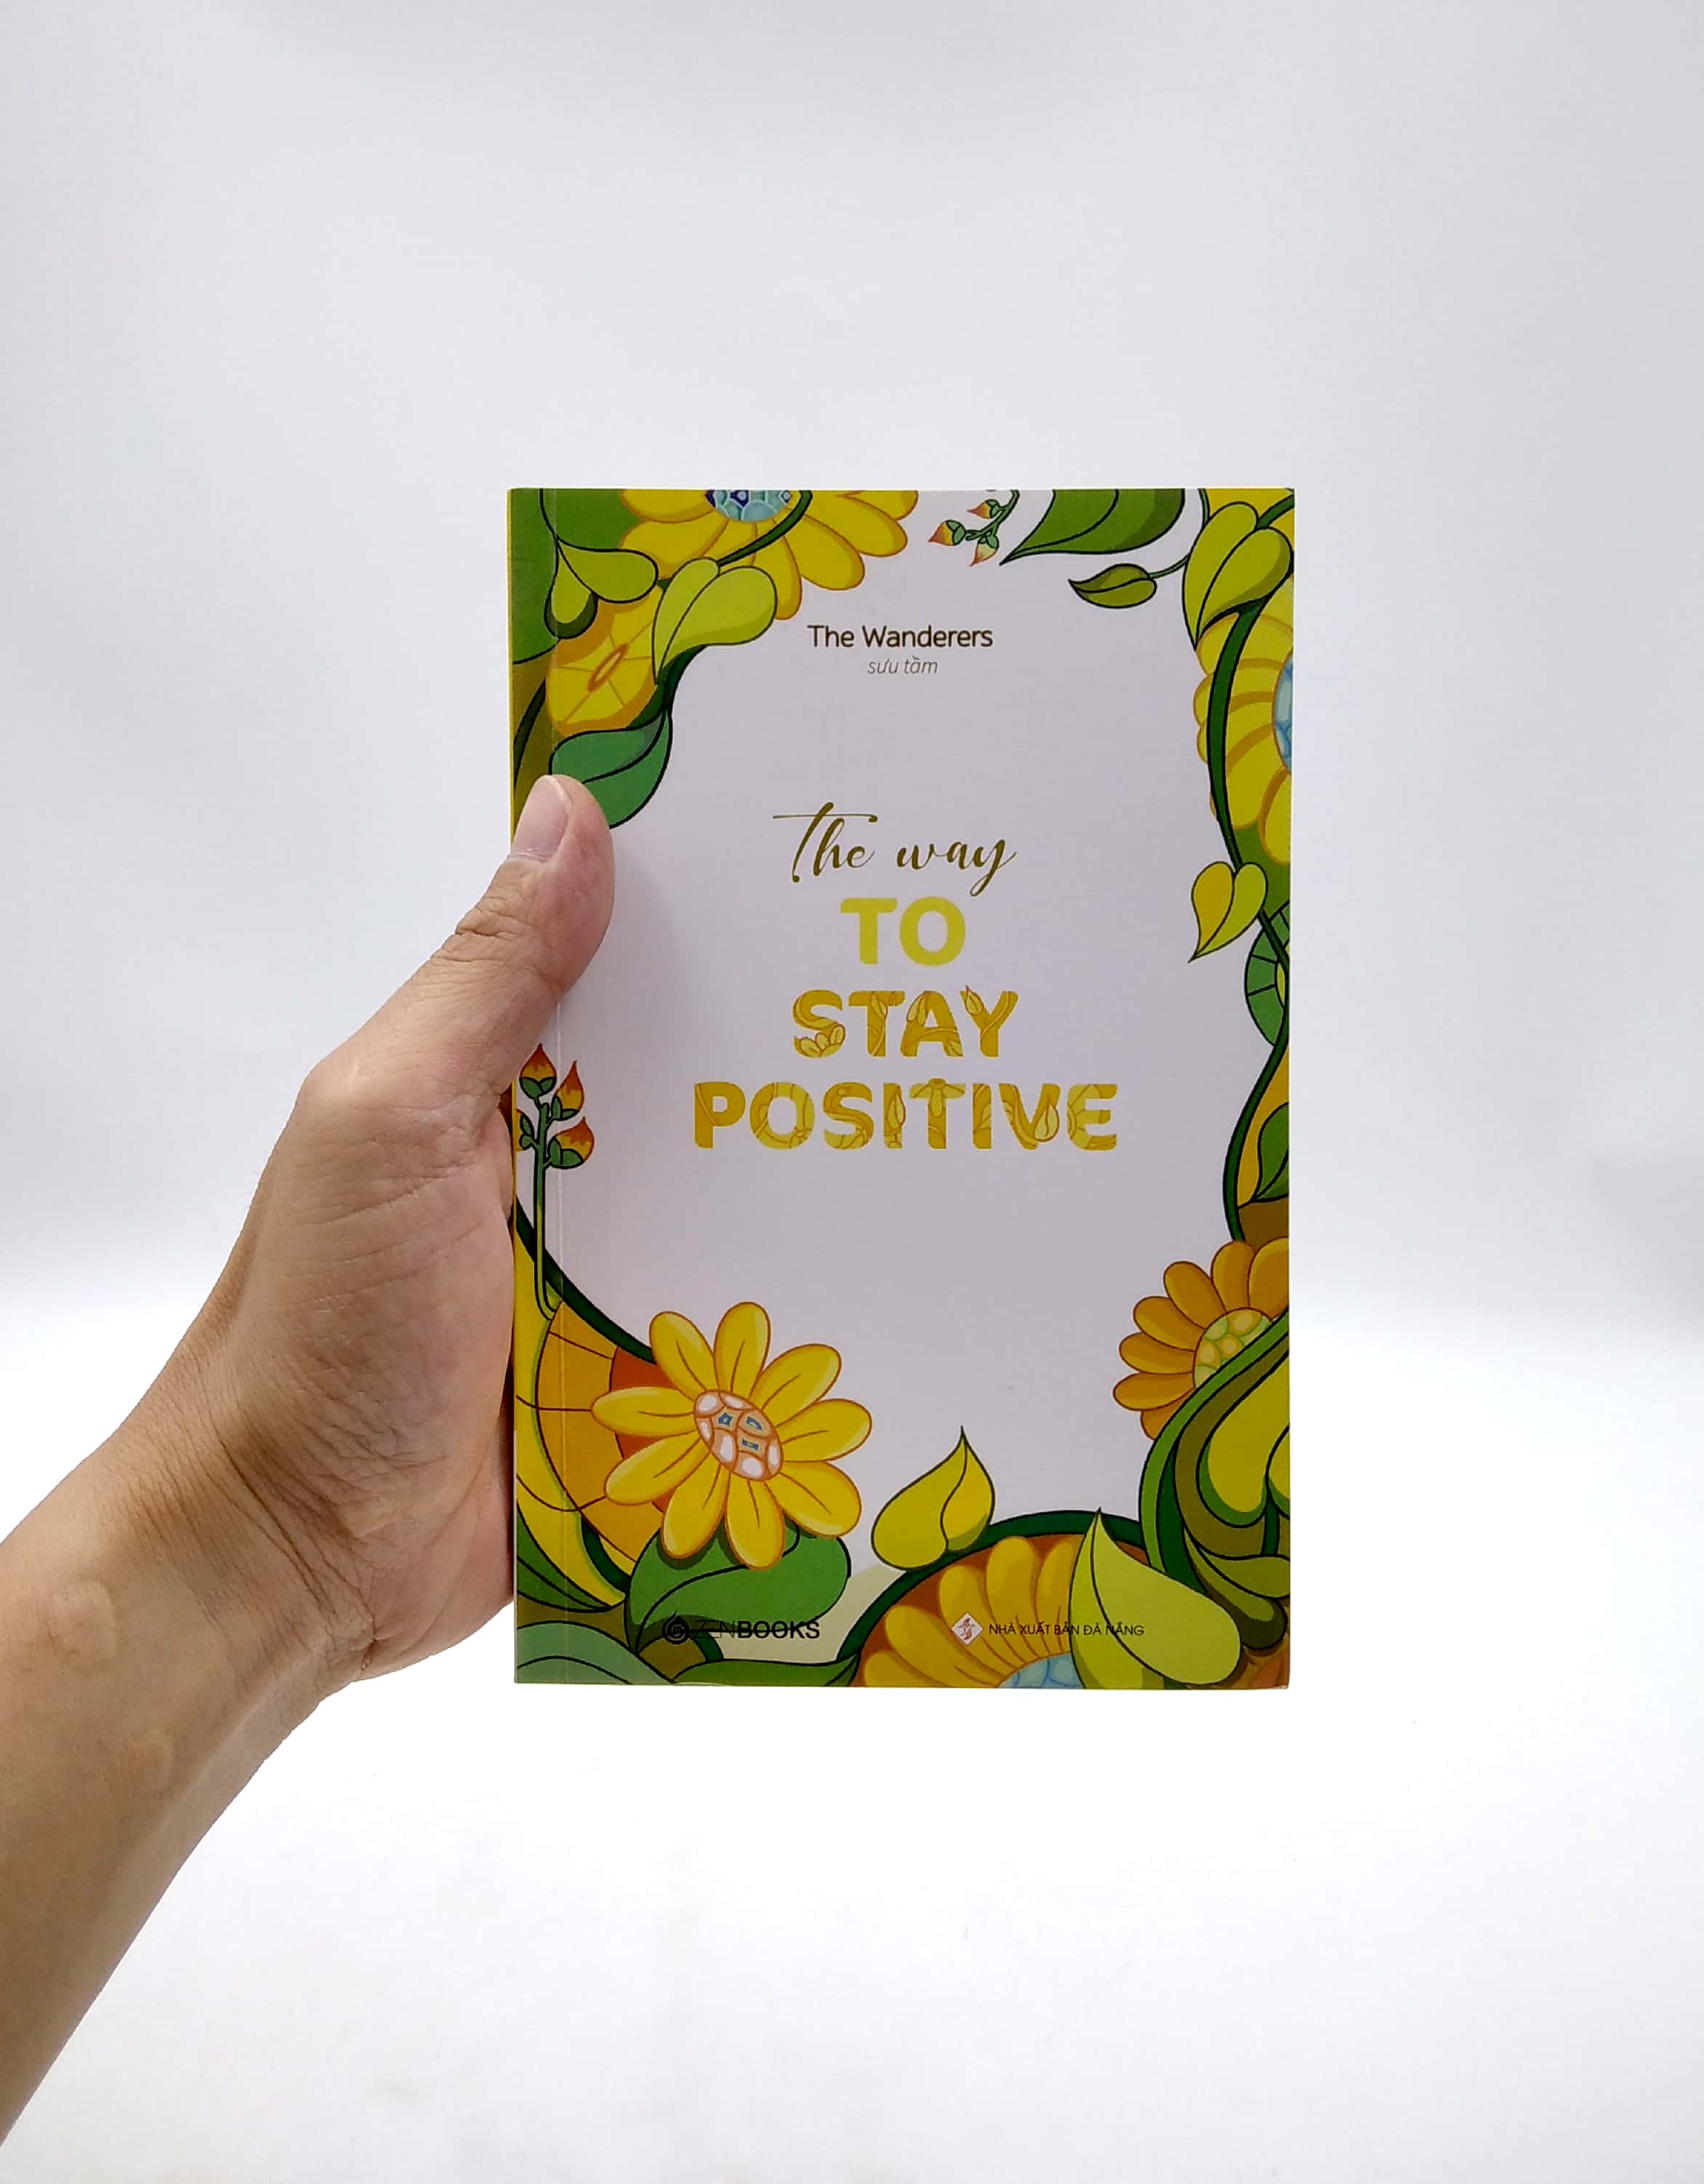 The Way To Stay Positive PDF